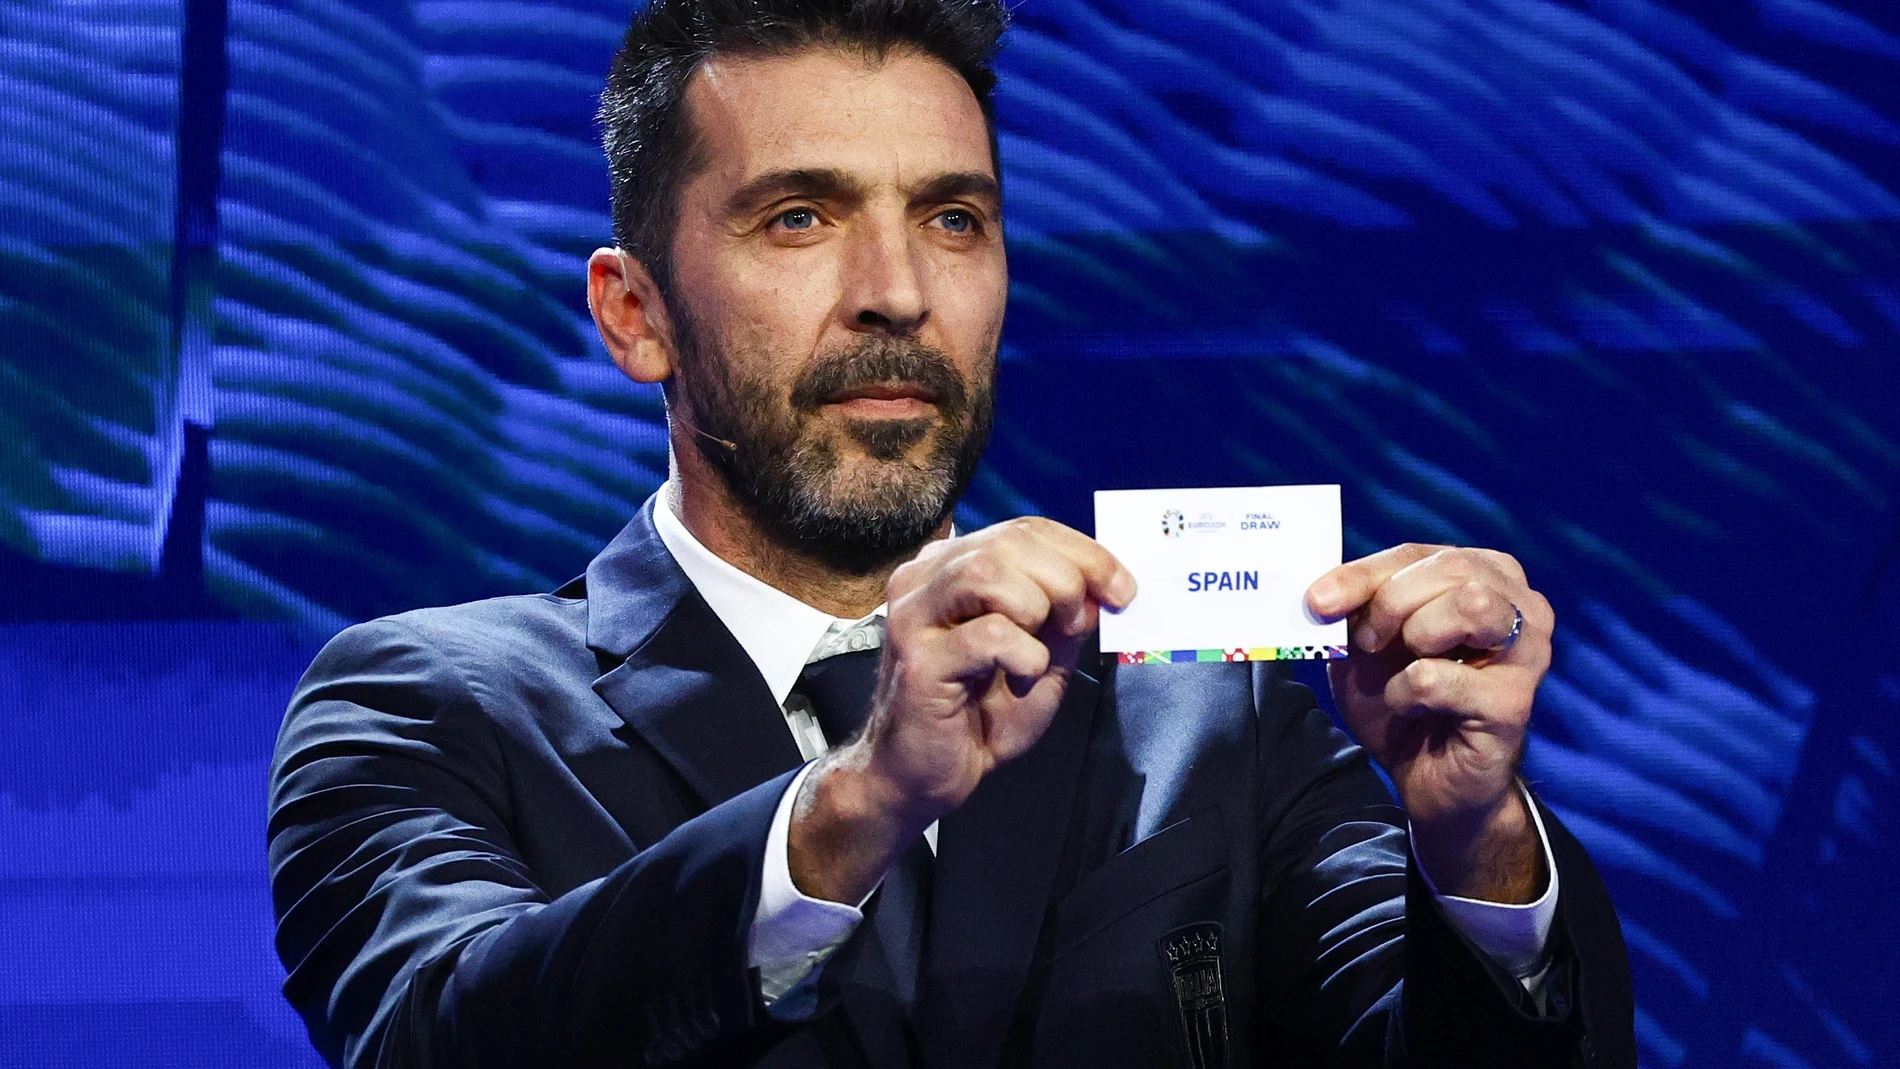 Hamburg (Germany), 02/12/2023.- Italian former football player Gianluigi Buffon holds a ticket of Spain during the UEFA EURO 2024 final tournament draw at the Elbphilharmonie in Hamburg, Germany, 02 December 2023. The UEFA EURO 2024 will take place in Germany from 14 June to 14 July. (Alemania, España, Hamburgo) EFE/EPA/FILIP SINGER 